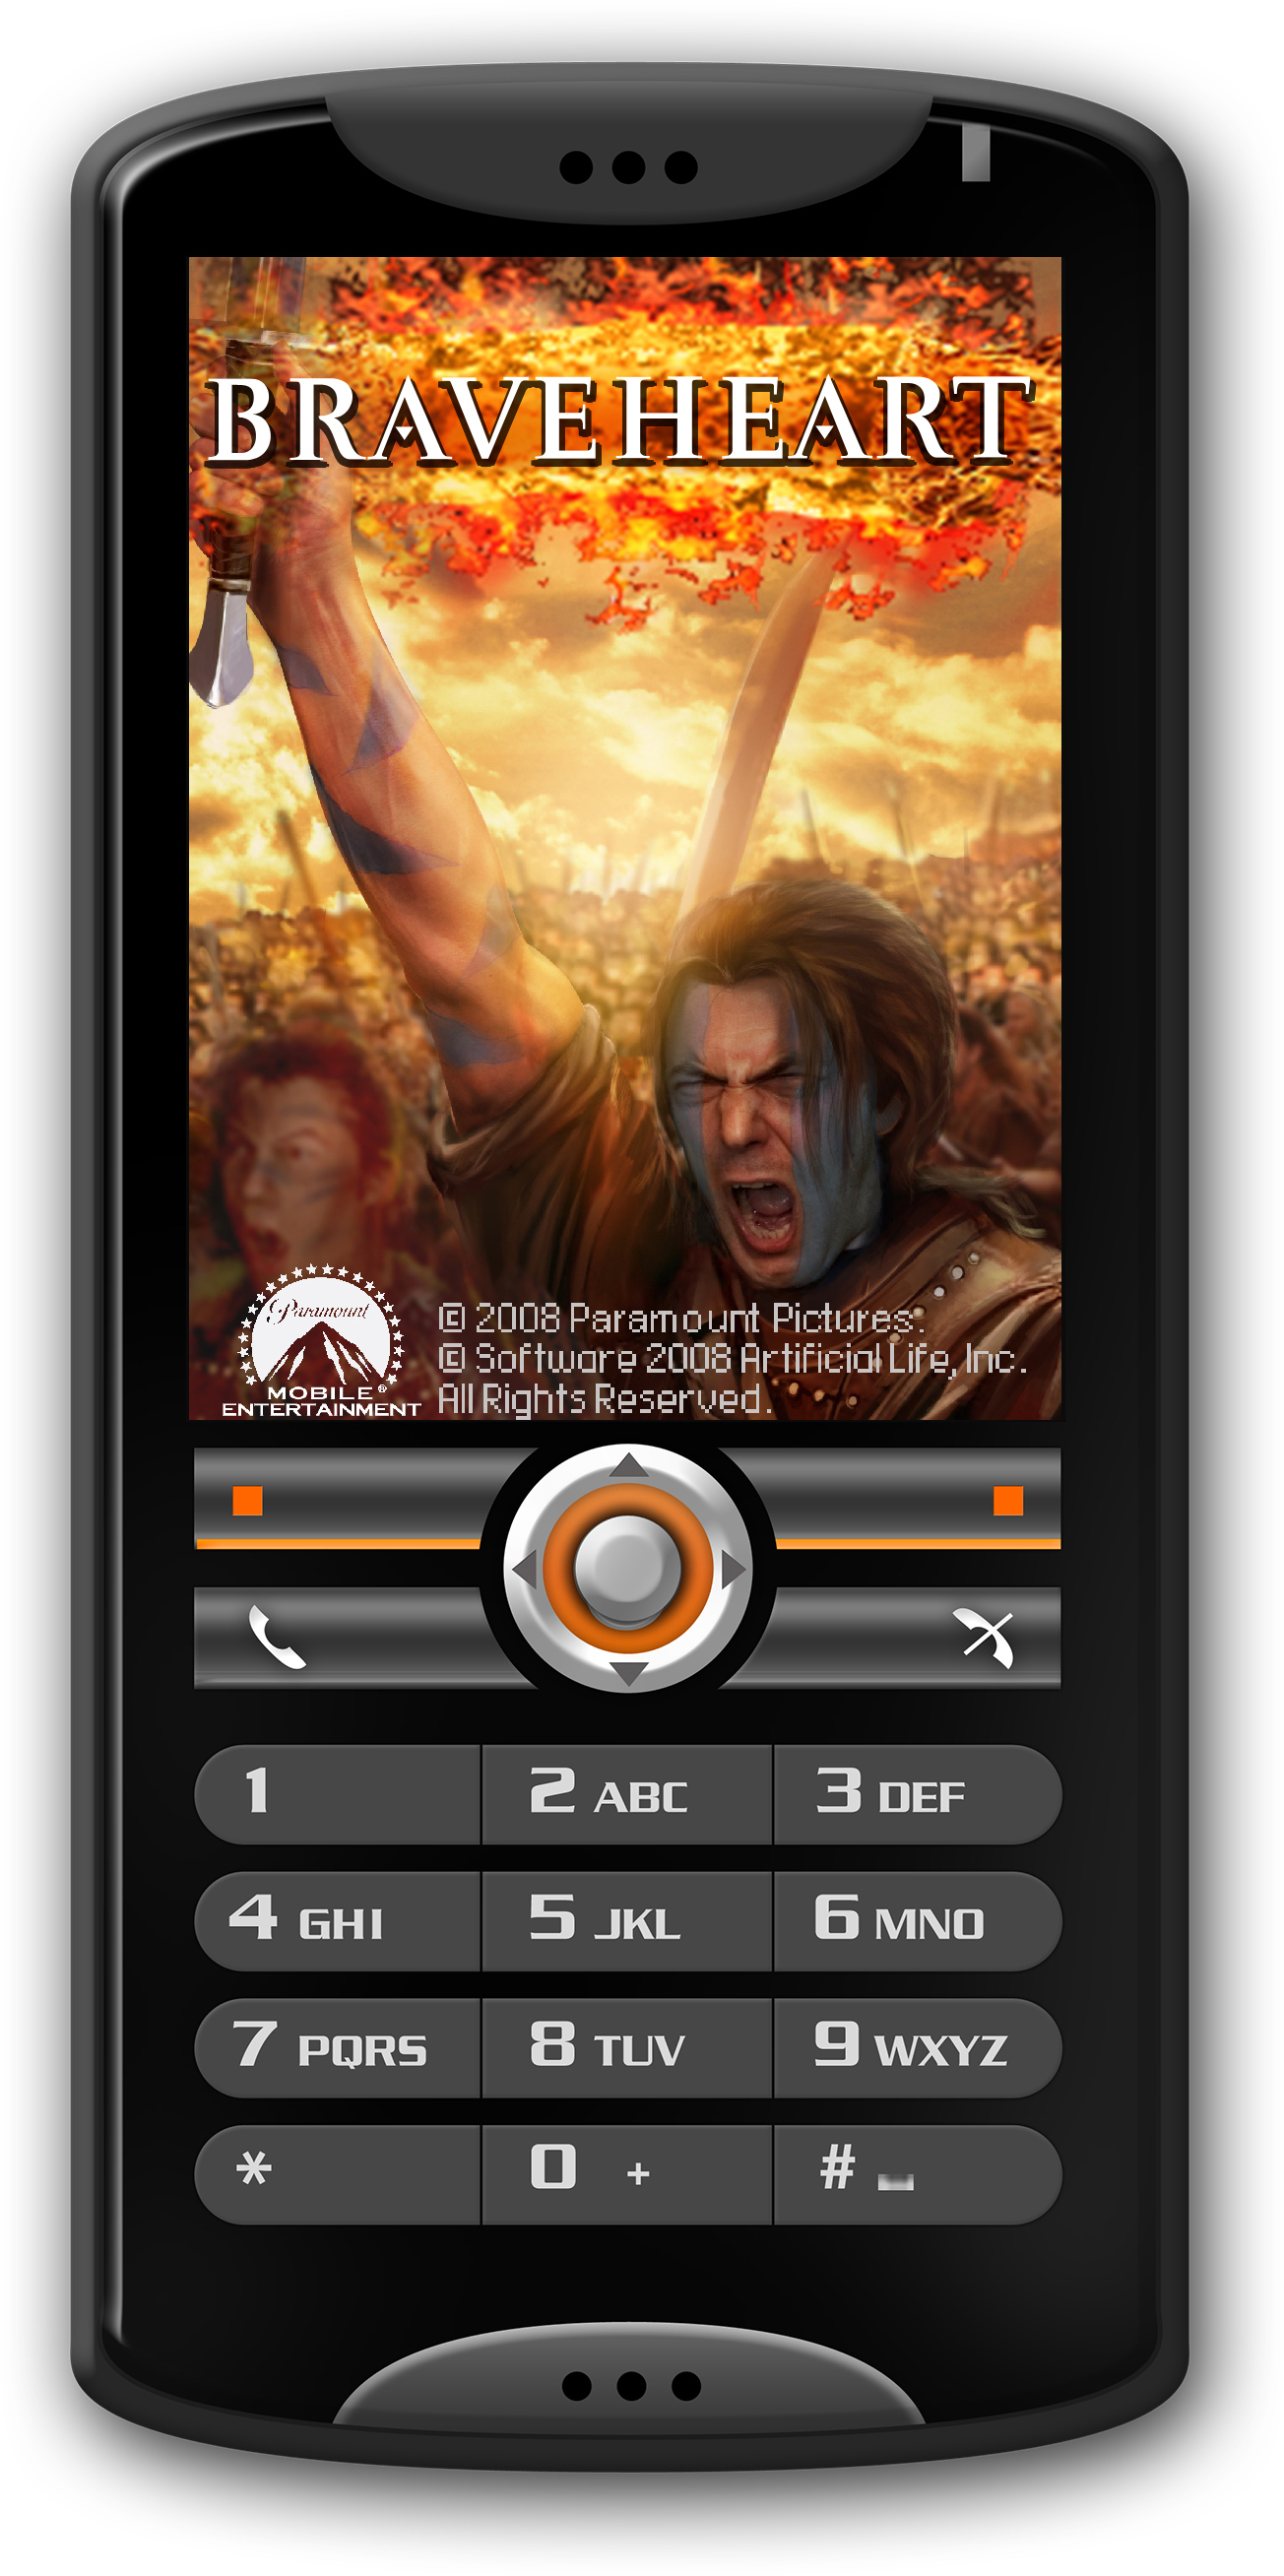 The Mobile Game -- BRAVEHEART